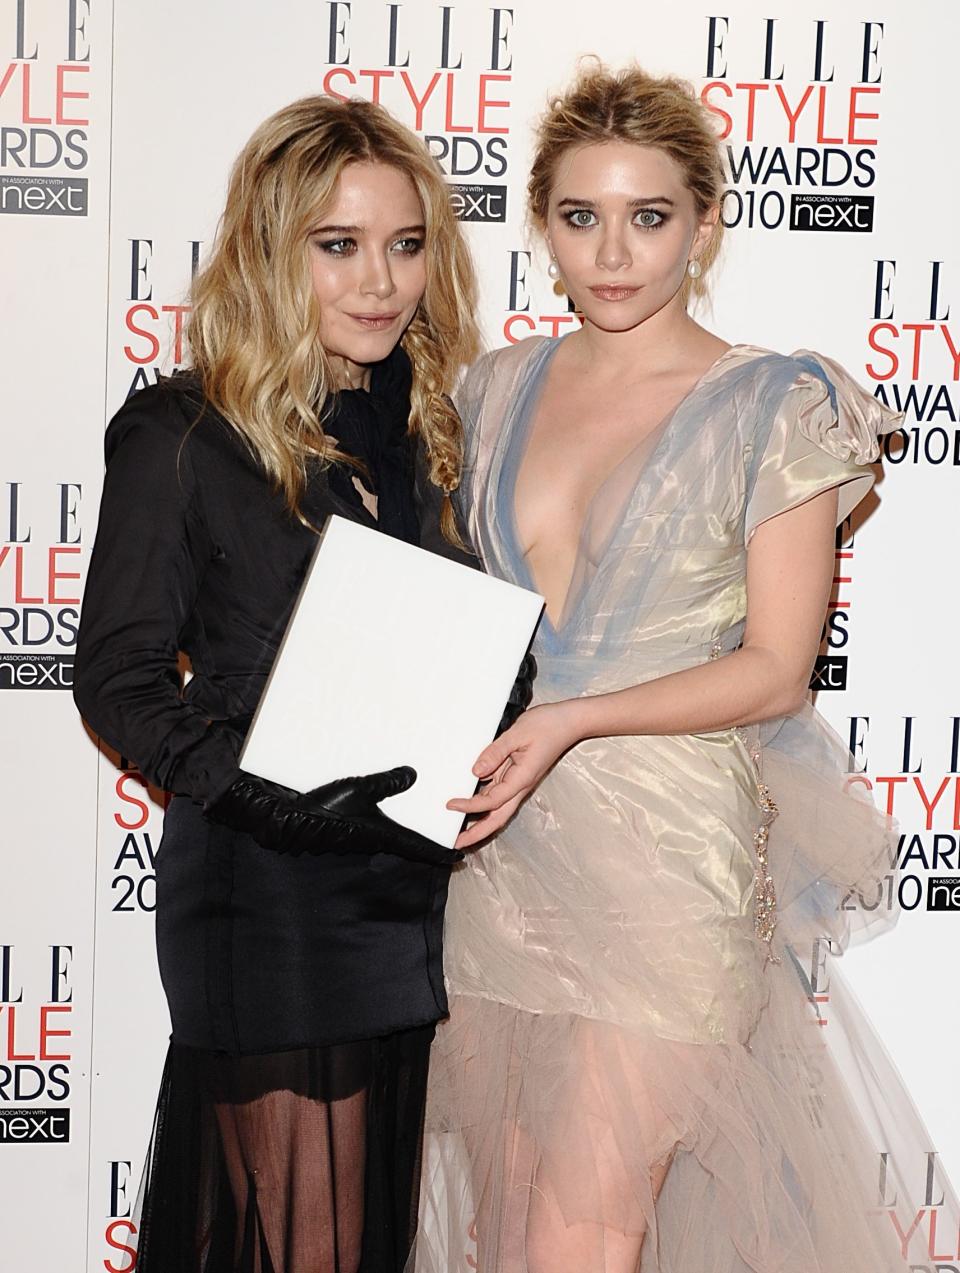 The 26-year-old twins shocked many "Full House" viewers when it was revealed there were actually two Michelles! Now, Mary-Kate and Ashley are successful business women and own their own fashion line, Elizabeth and James. They're also the older sisters of Elizabeth Olsen.